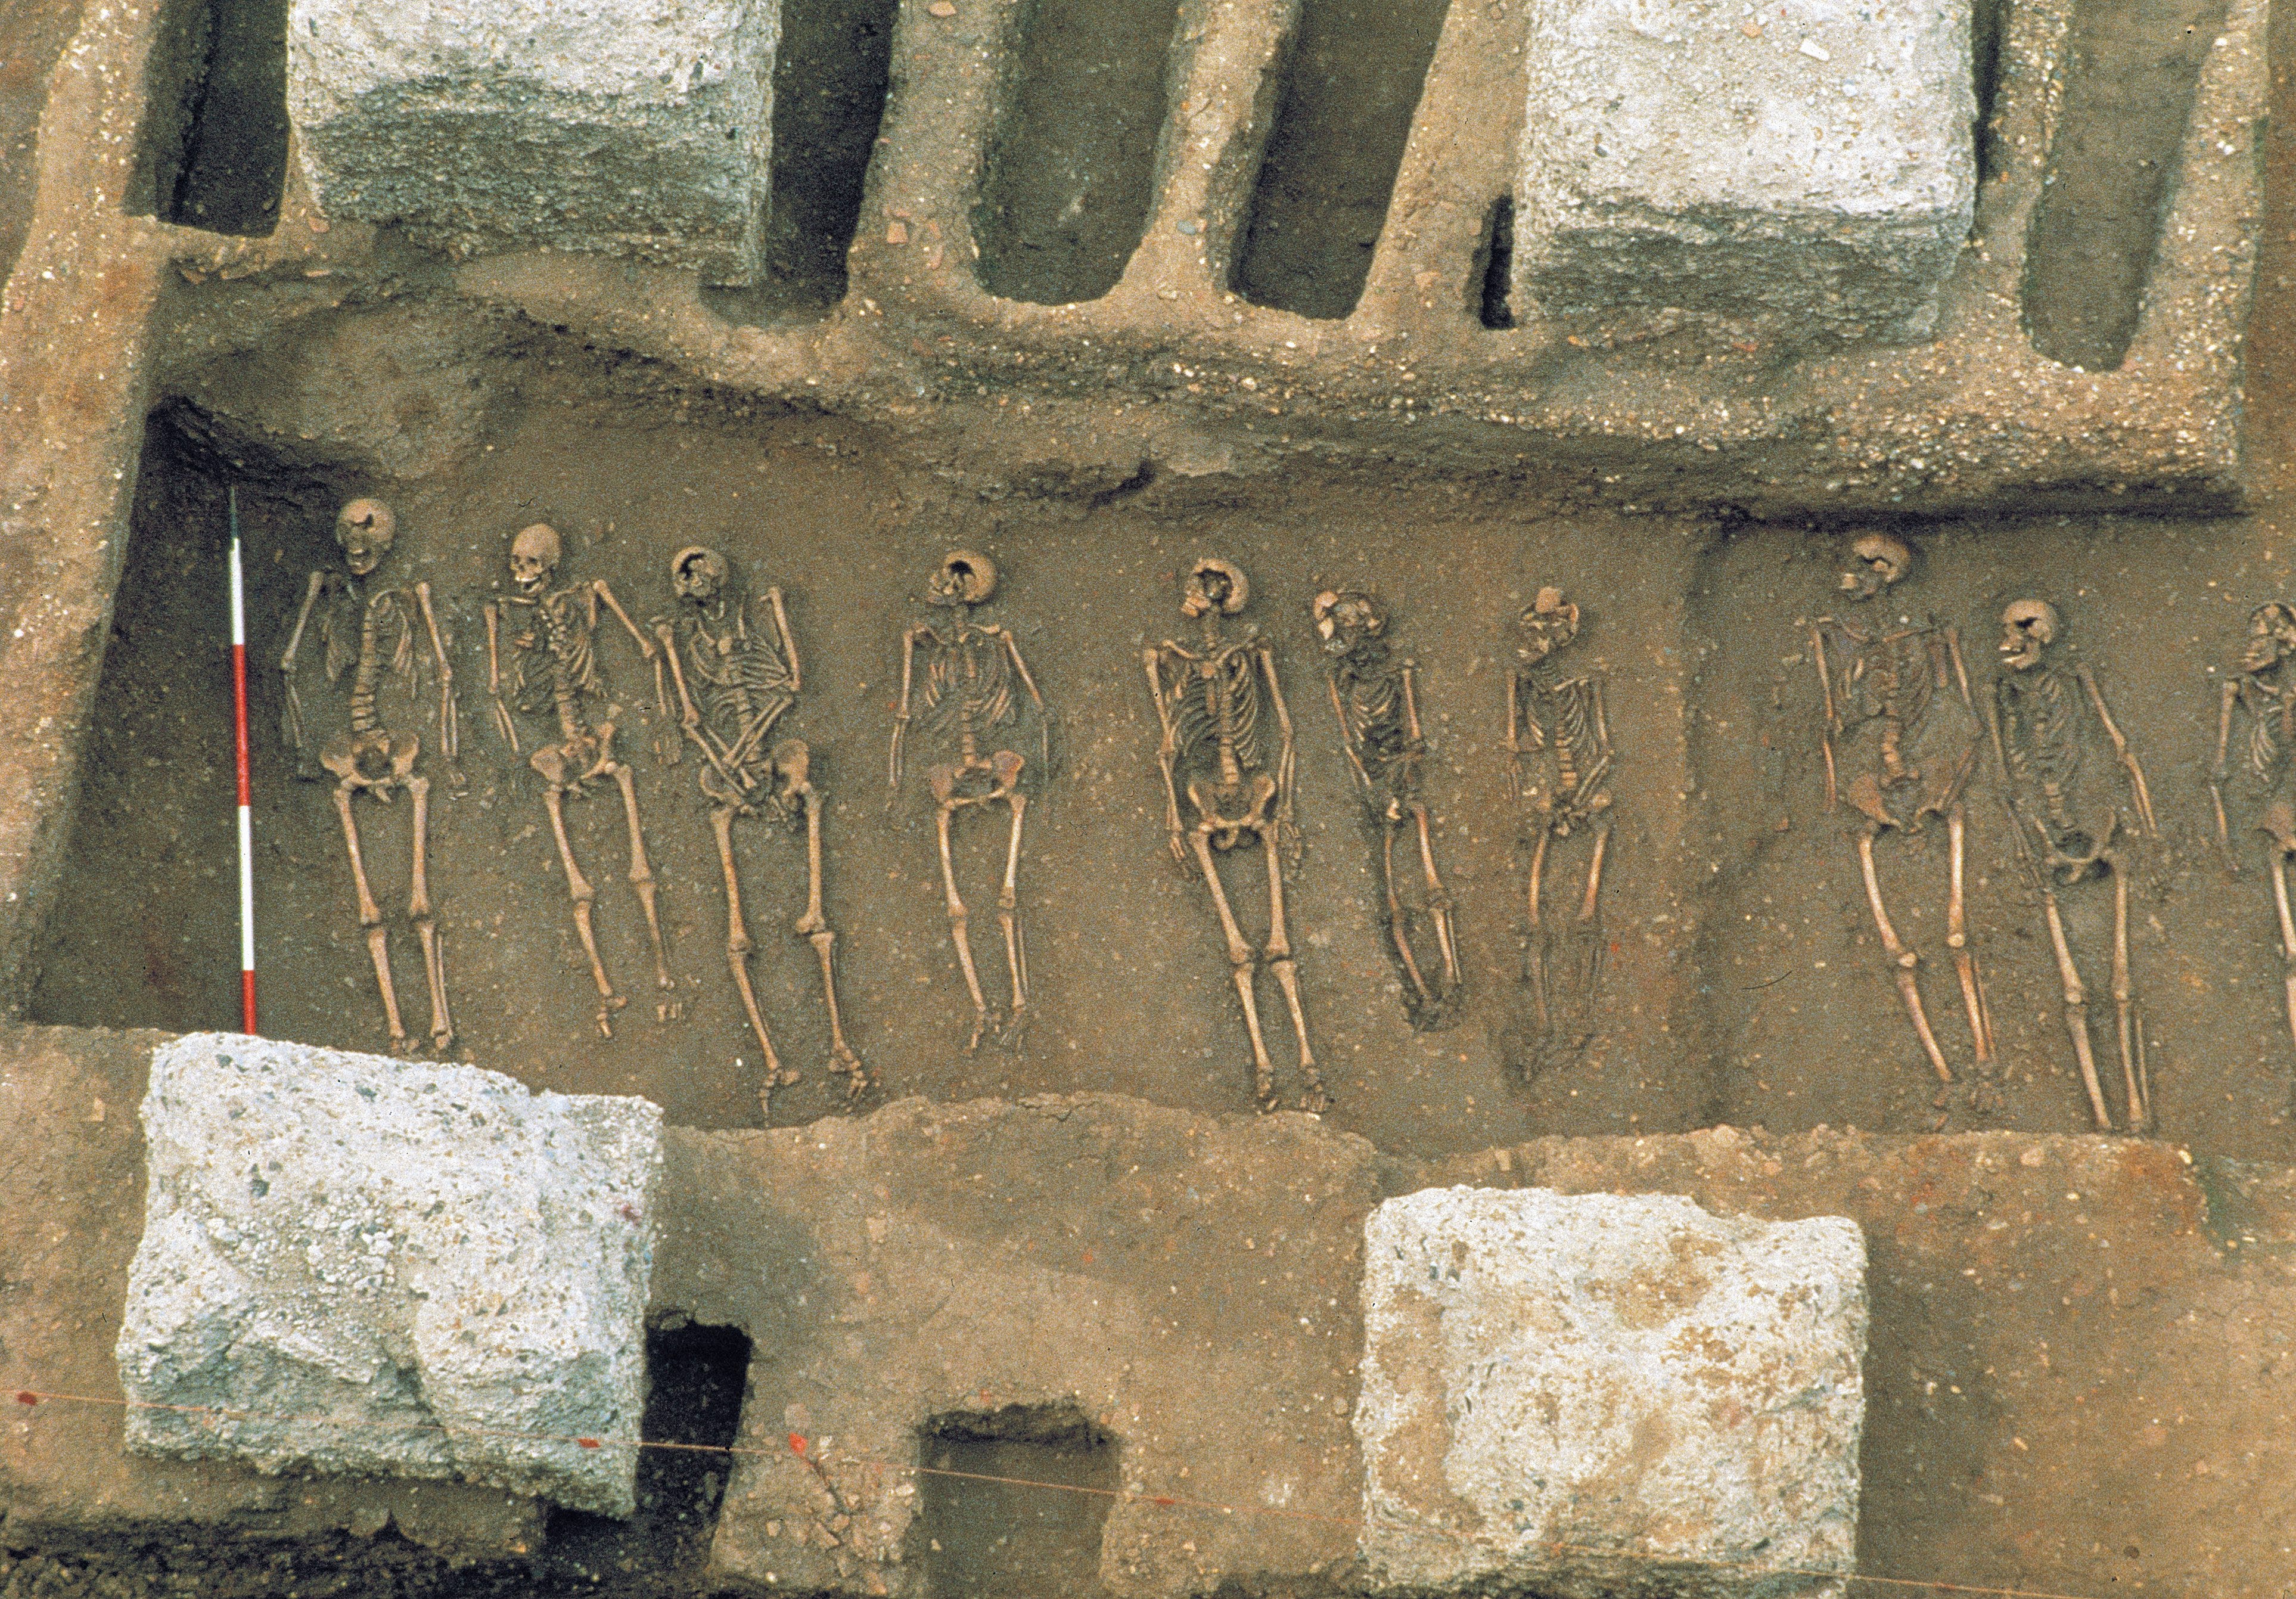 Black women most likely to die during mediaeval plague: study